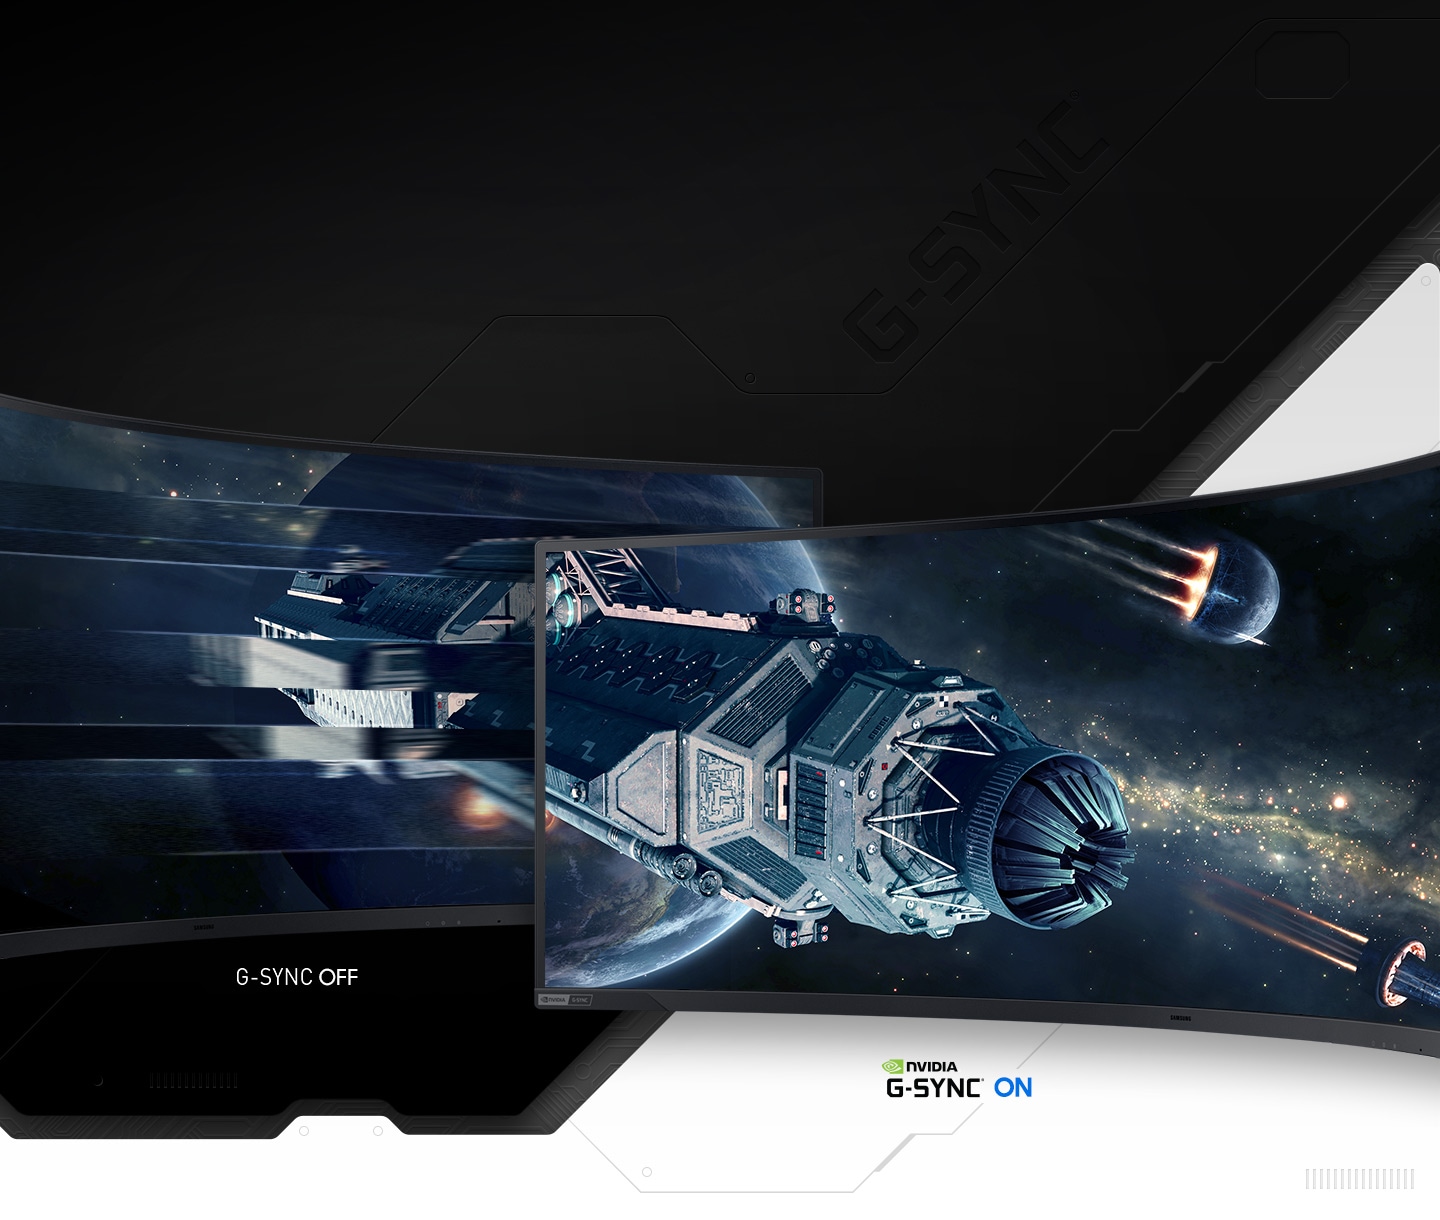 Two monitors are shown side-by-side with starships floating in space on both screens. One screen is shown with NVIDIA G-Sync on and displays a smooth ship movement while the other monitor is shown with G-Sync off and displays a scattered movement with tearing.